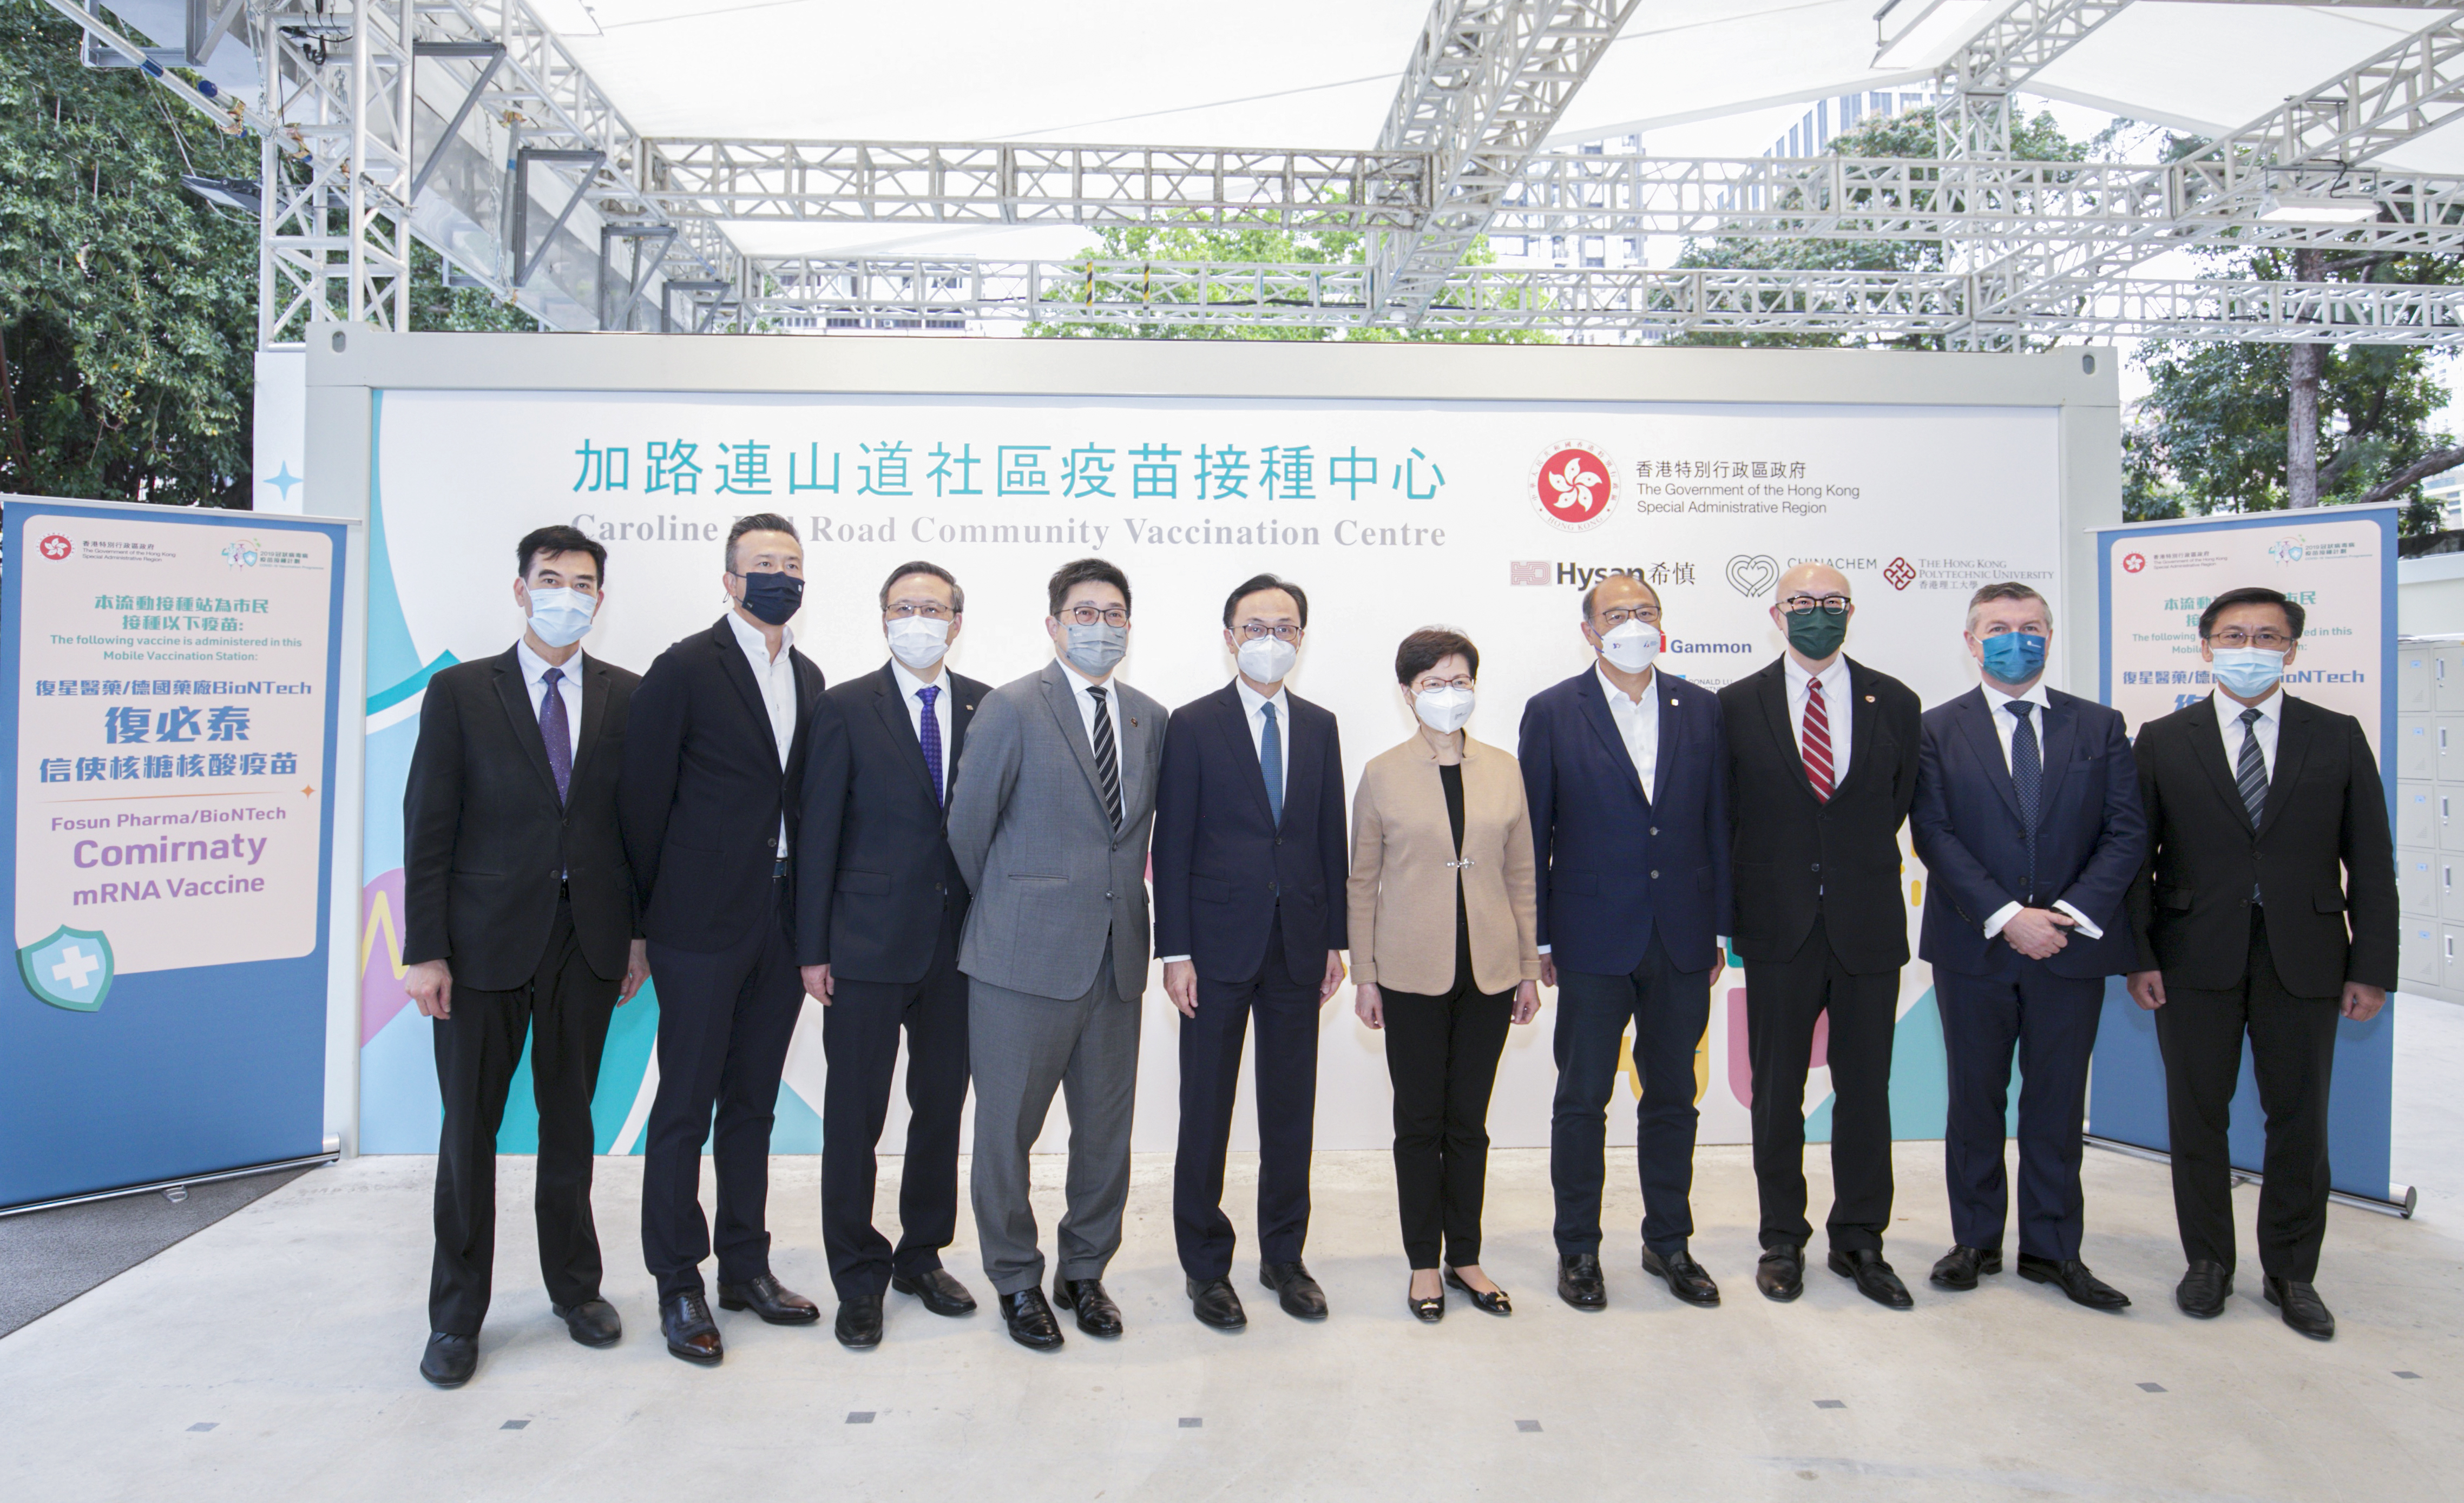 The Chief Executive Carrie Lam (5th from right), Secretary for the Civil Service Patrick Nip (5th from left), Executive Director and CEO of Chinachem Group Donald Choi (3rd from right), Executive Director and Chief Operating Officer of Hysan Development Ricky Lui (4th from left), Chief Executive of Gammon Construction Kevin O'Brien (2nd from right), Chairman of the Council of the Hong Kong Polytechnic University (Poly U) Dr Lam Tai-fai (4th from right) and President of Poly U Prof Teng Jin-guang (3rd from left), East Asia Regional Chairman of Arup Michael Kwok (right), Vice Chairman of Ronald Lu and Partners Bryant Lu (2nd from left) and Managing Director, Property & Buildings, China Region of WSP Colin Chung (left) take a group photo at the Caroline Hill Road pop-up Community Vaccination Centre.